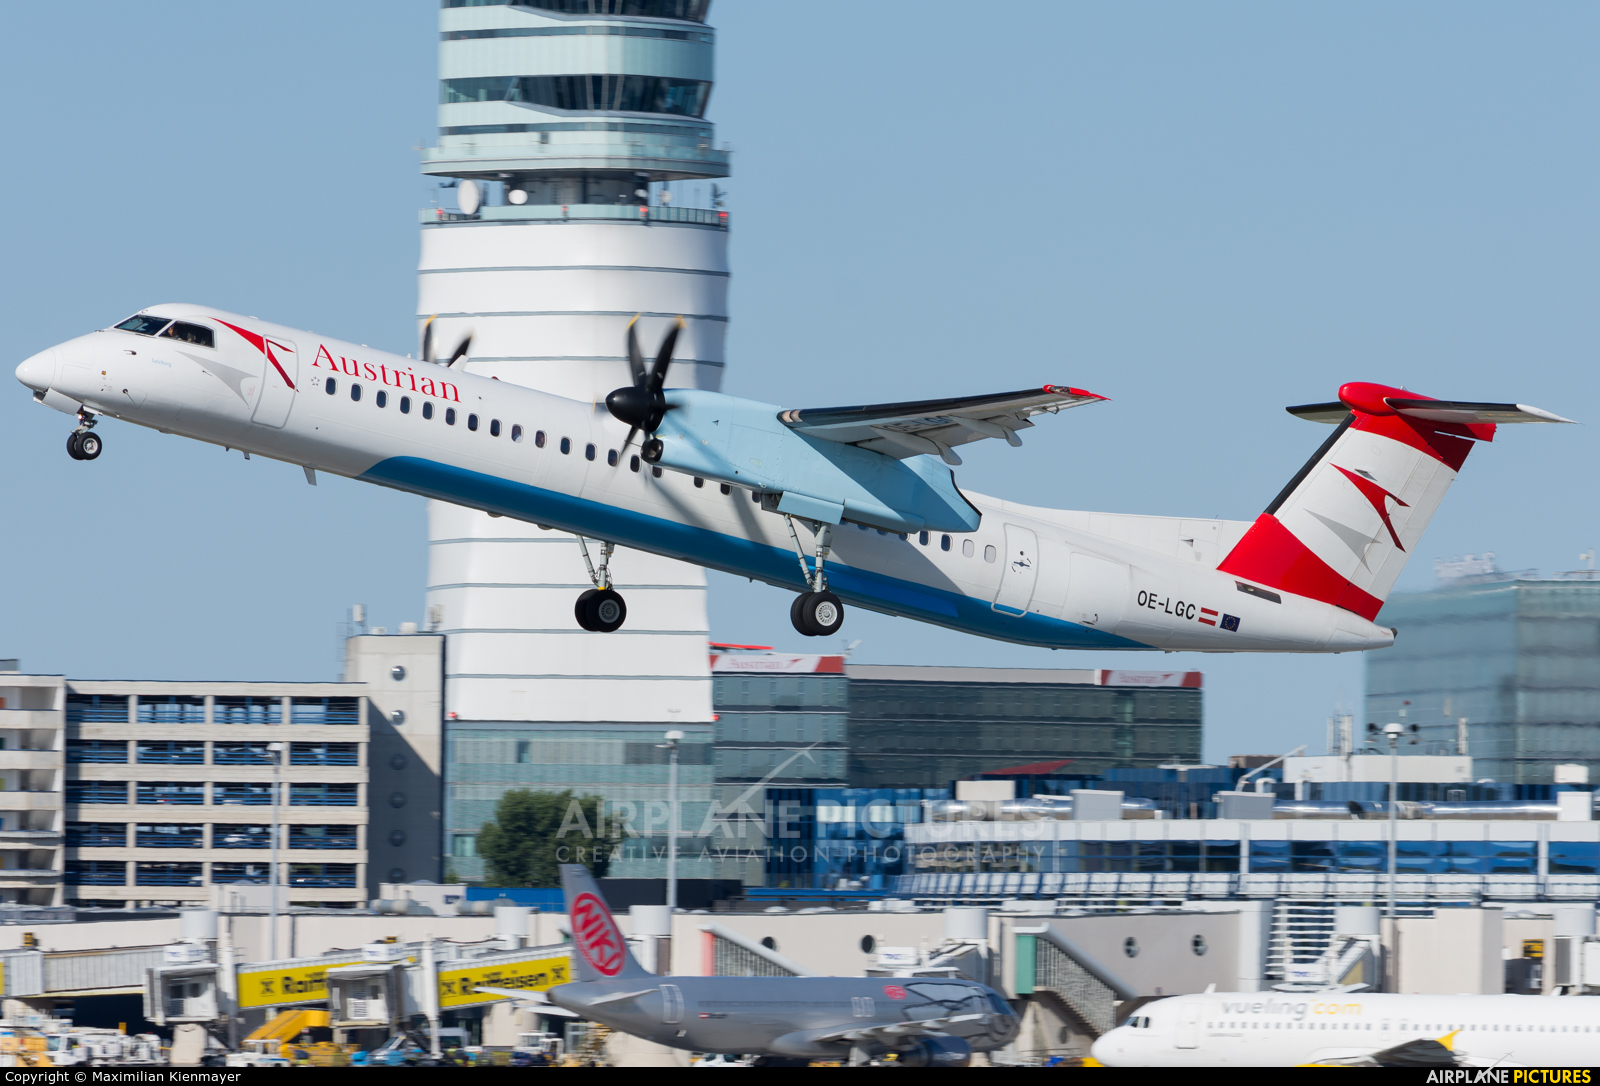 Austrian Airlines/Arrows/Tyrolean OE-LGC aircraft at Vienna - Schwechat